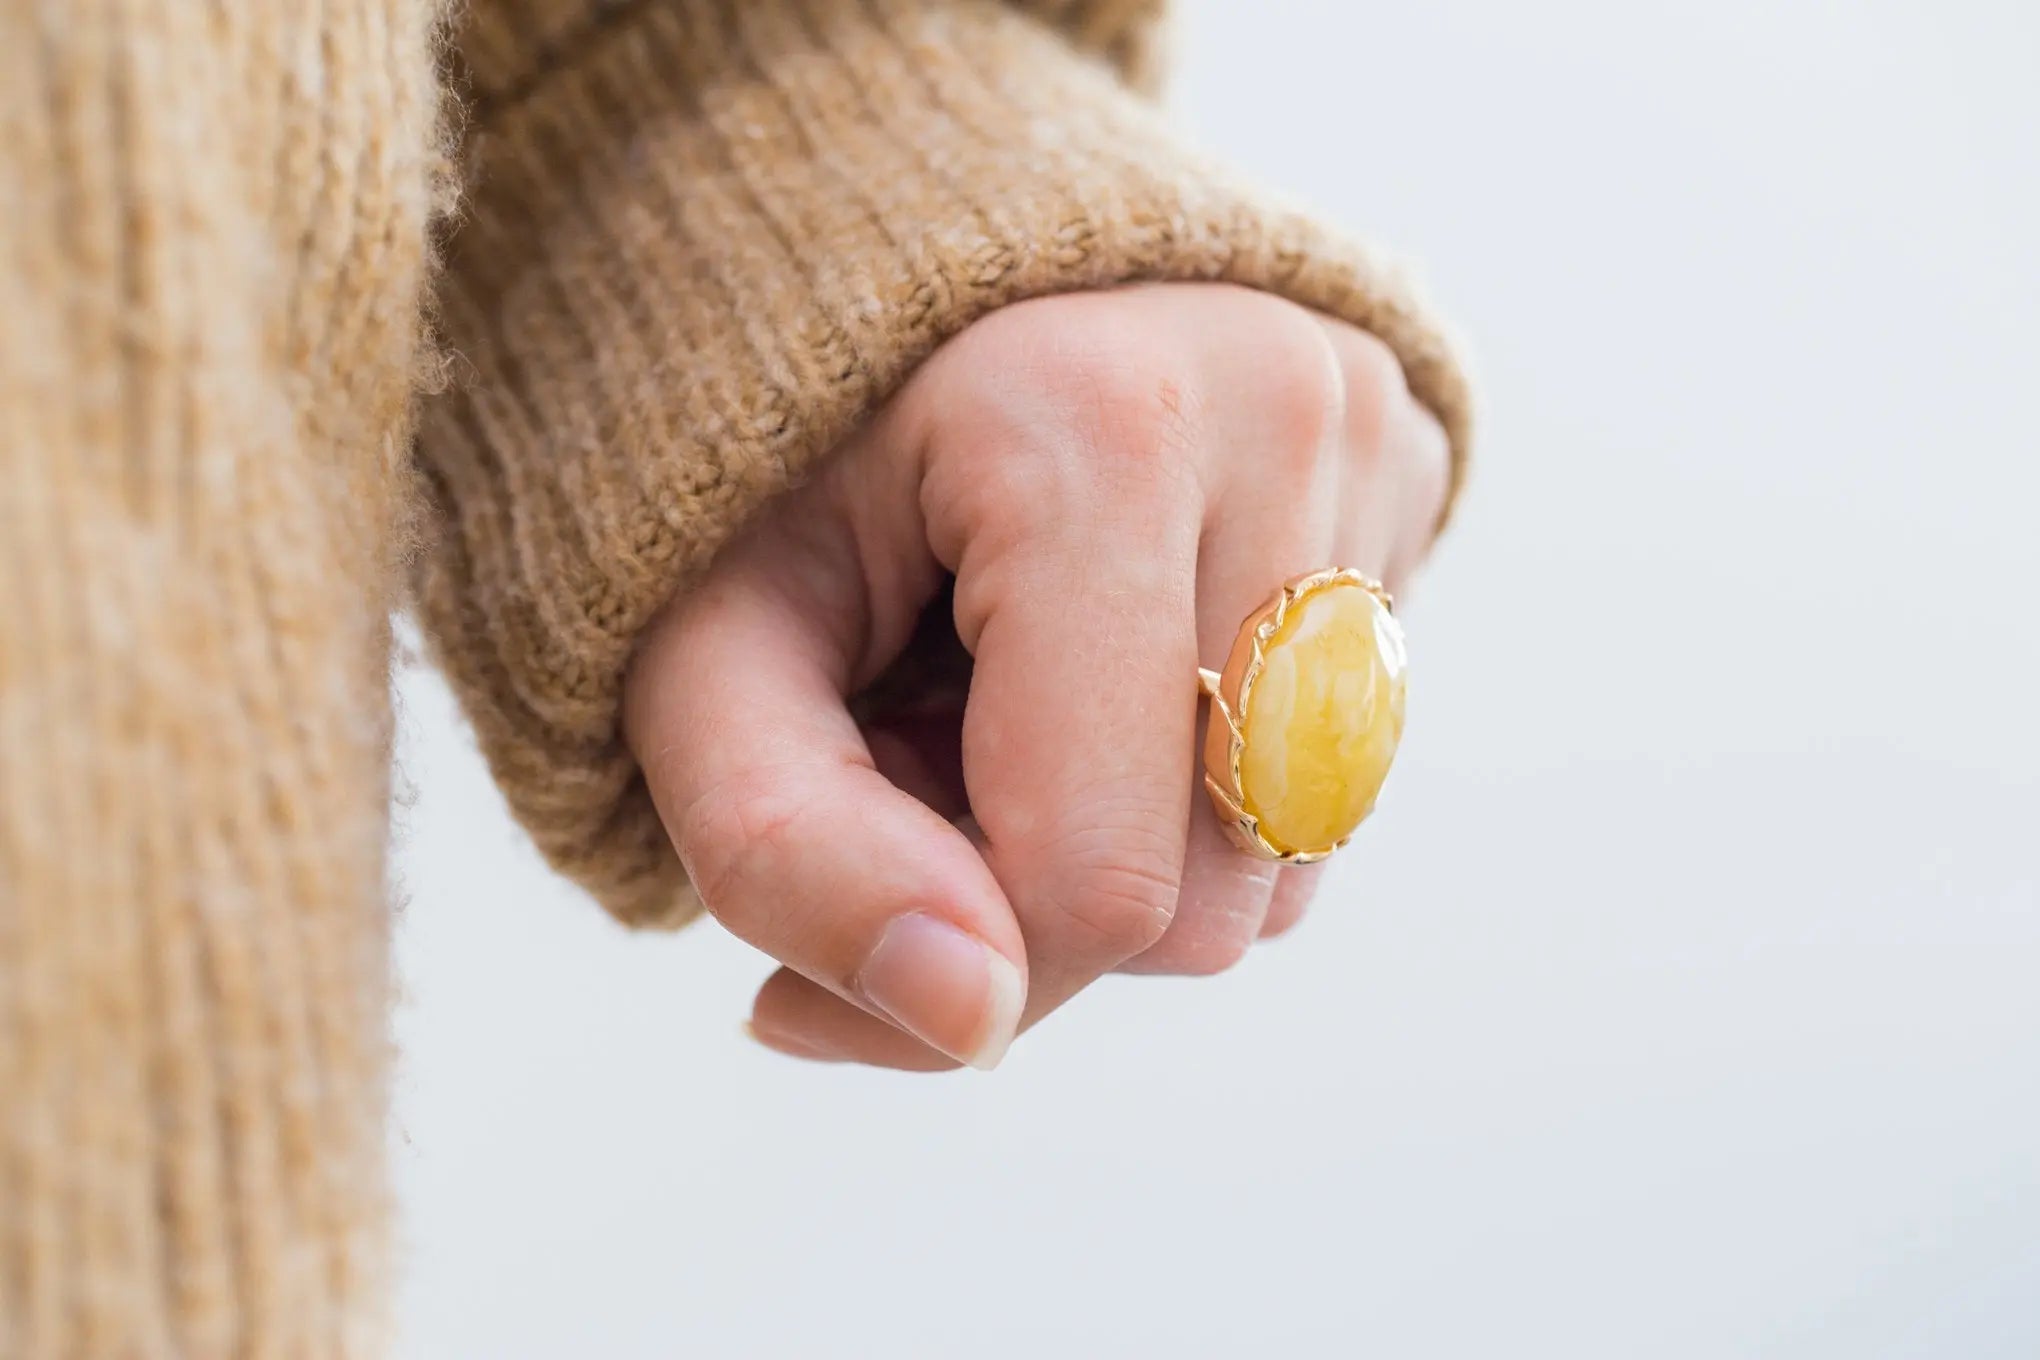 Oval Butterscotch Amber Statement Ring- Rings- Baltic Beauty